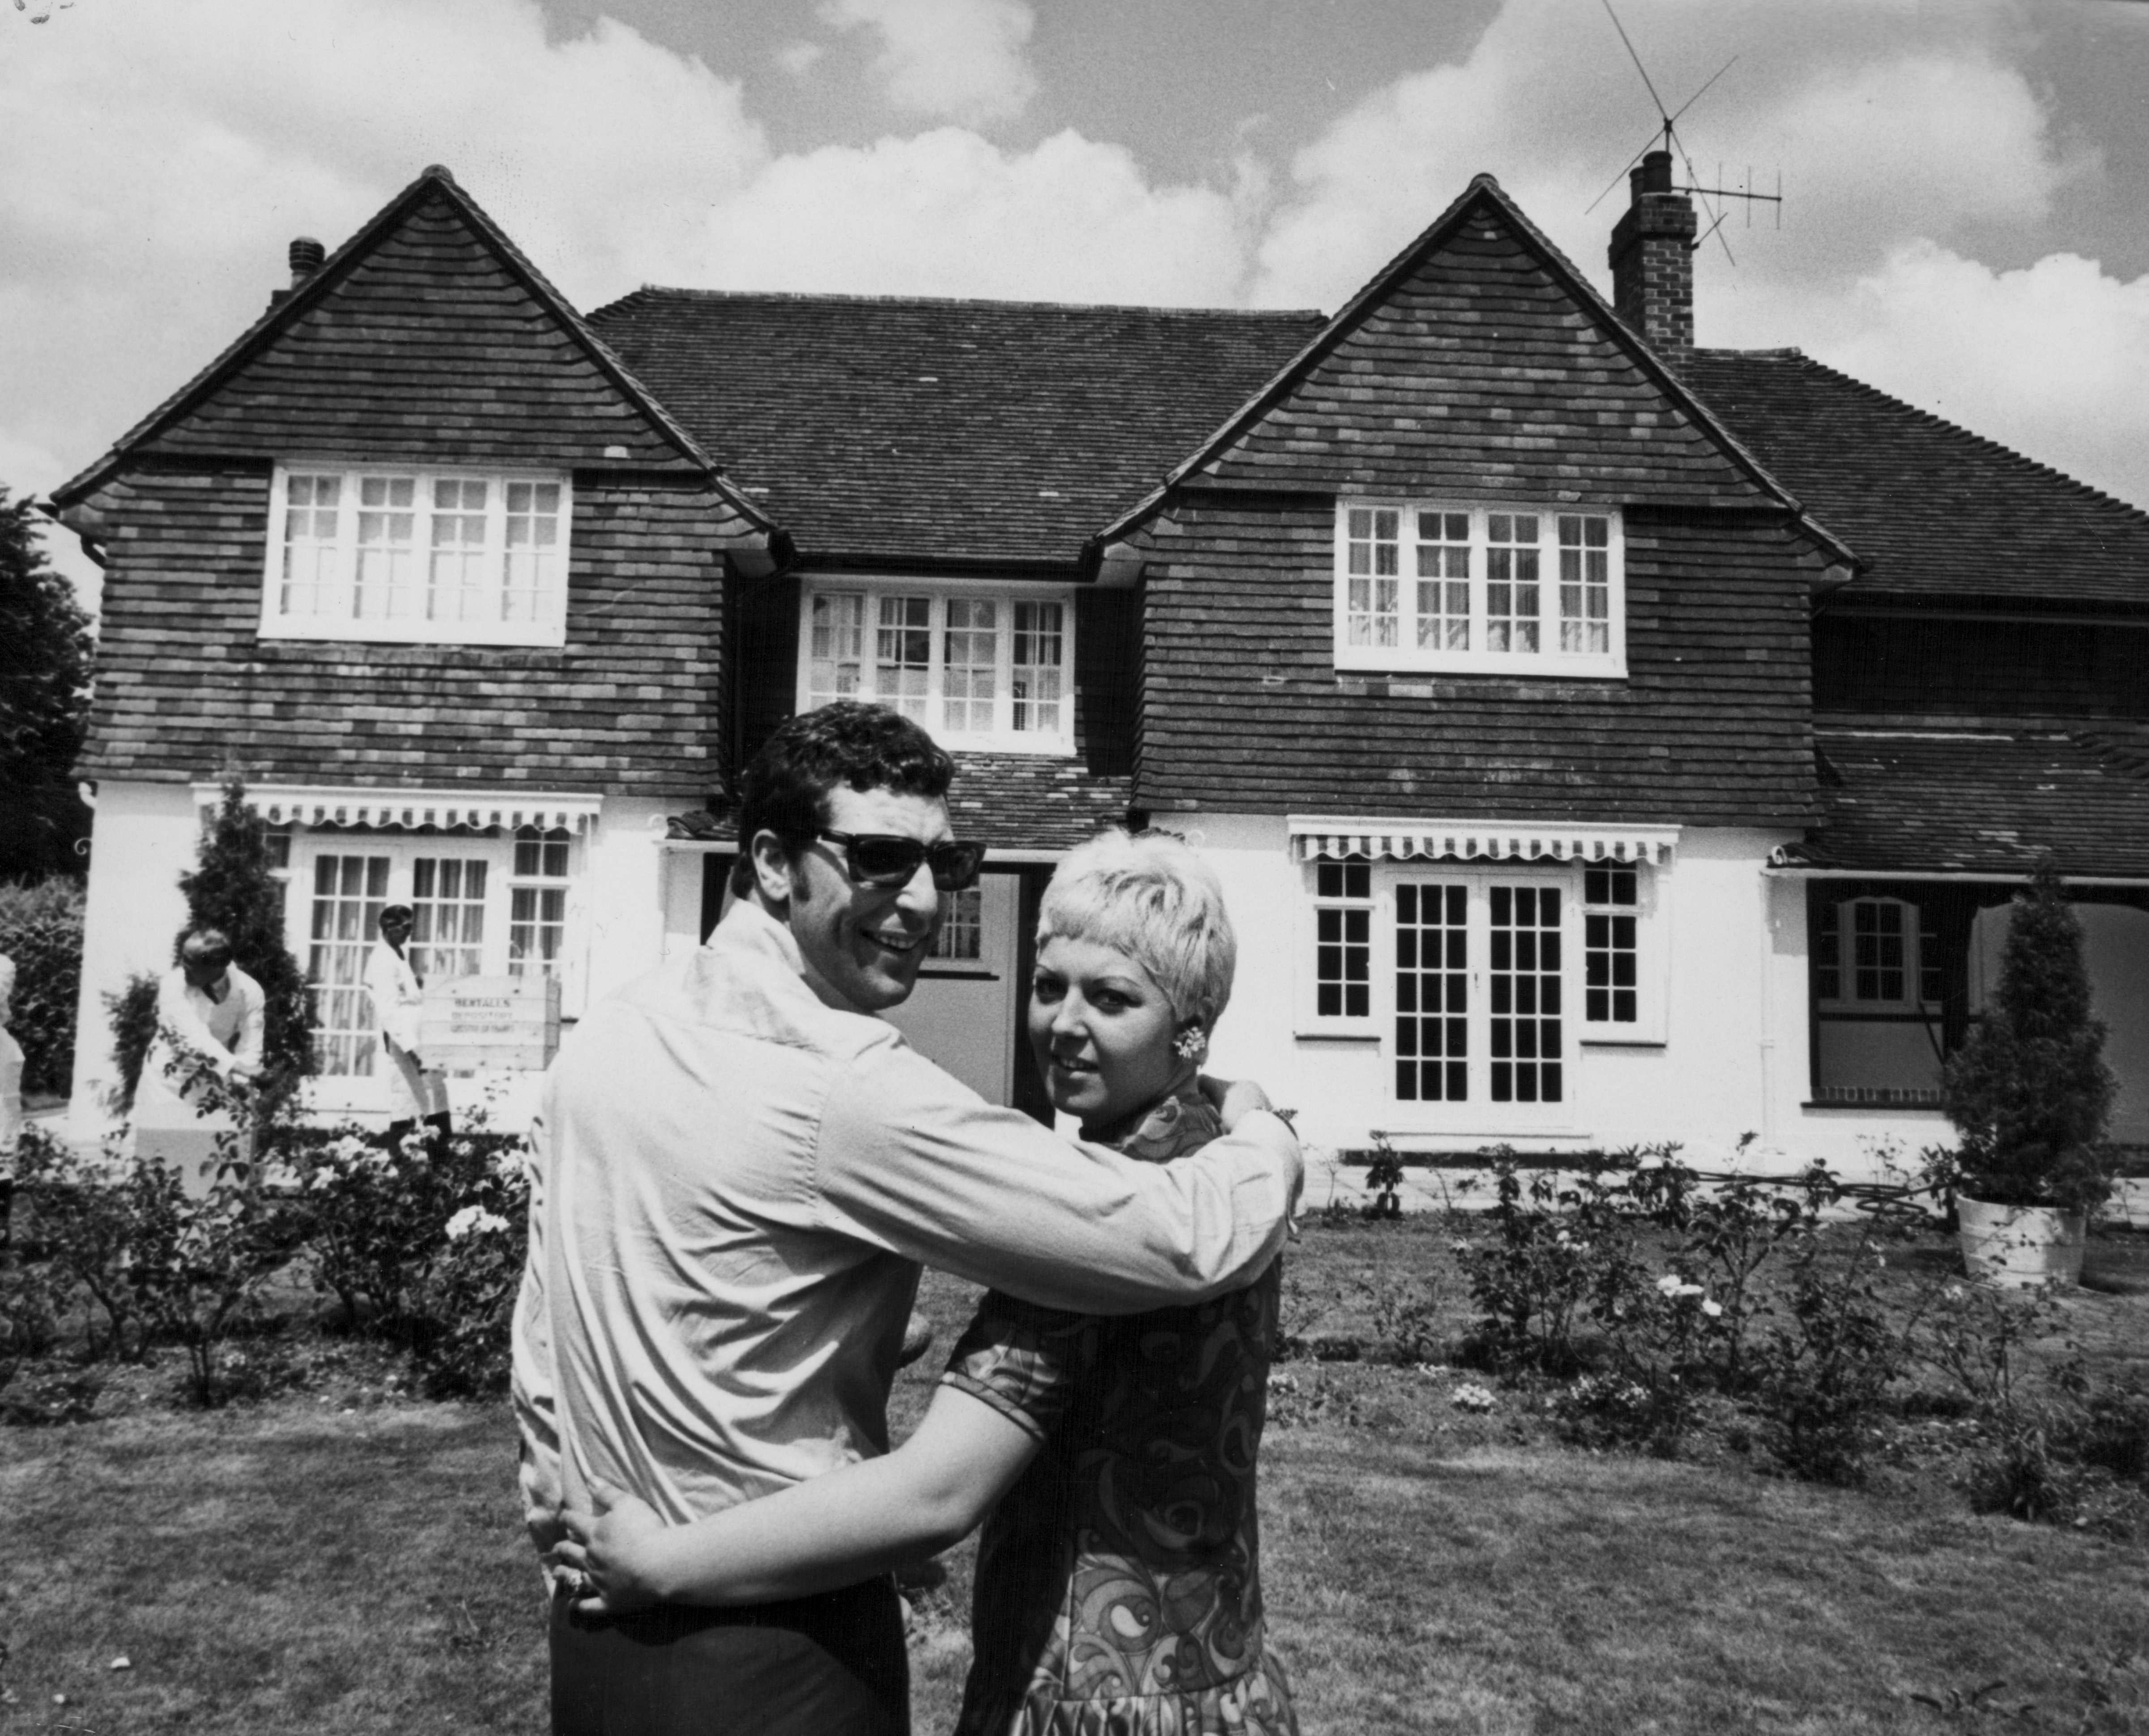 Tom Jones and Linda Trenchard outside their home in Glamorgan, Wales, July 20, 1967 | Source: Getty Images